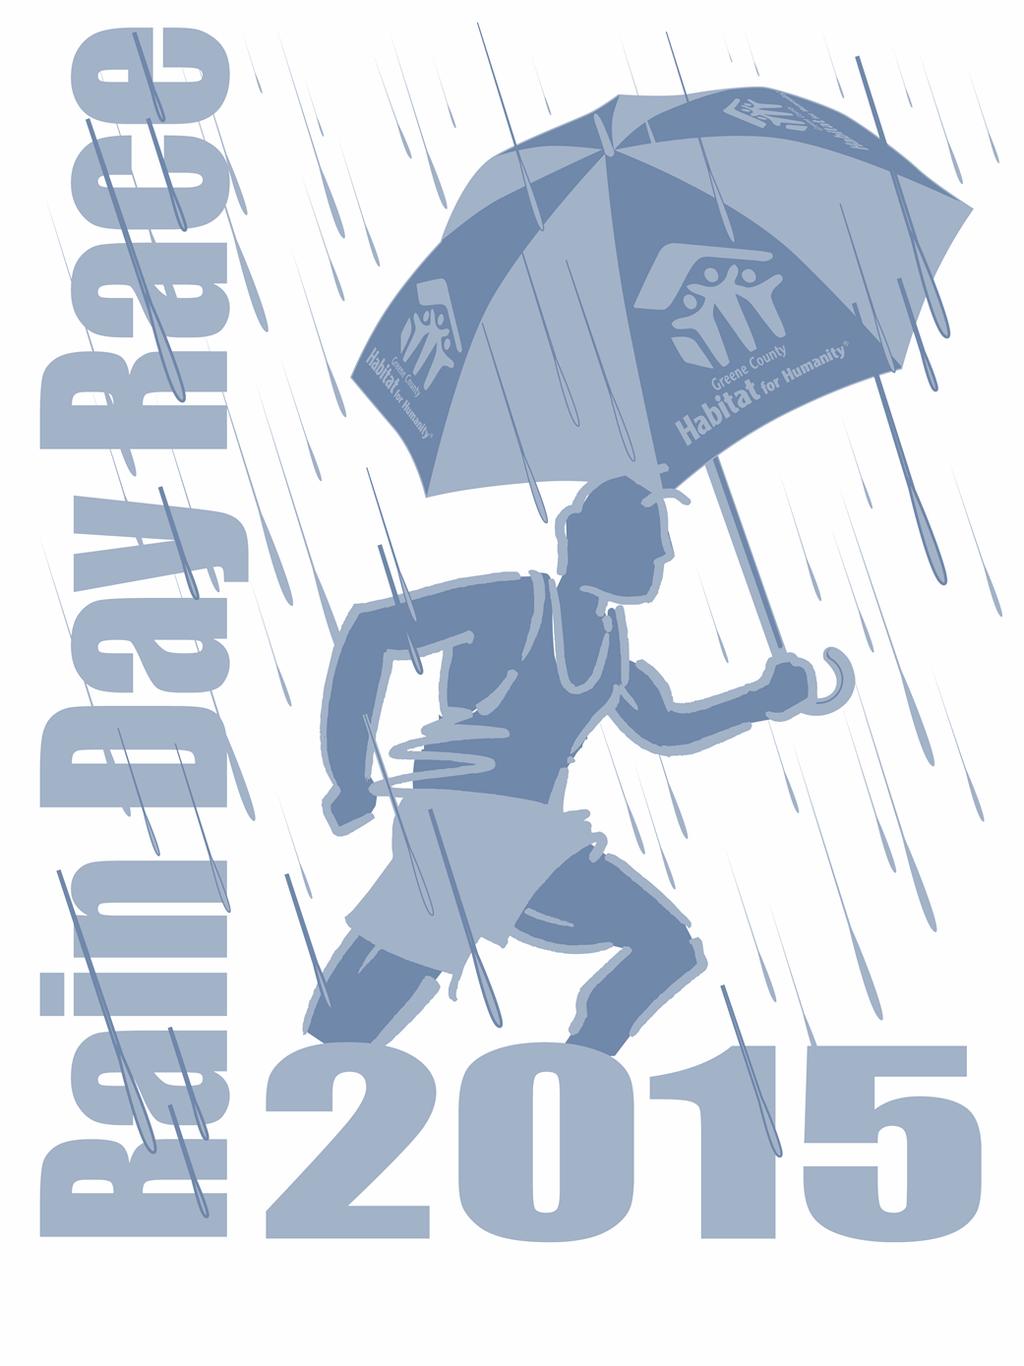 Annual Rain Day Race All Proceeds from this race benefit The Greene County Habitat for Humanity.